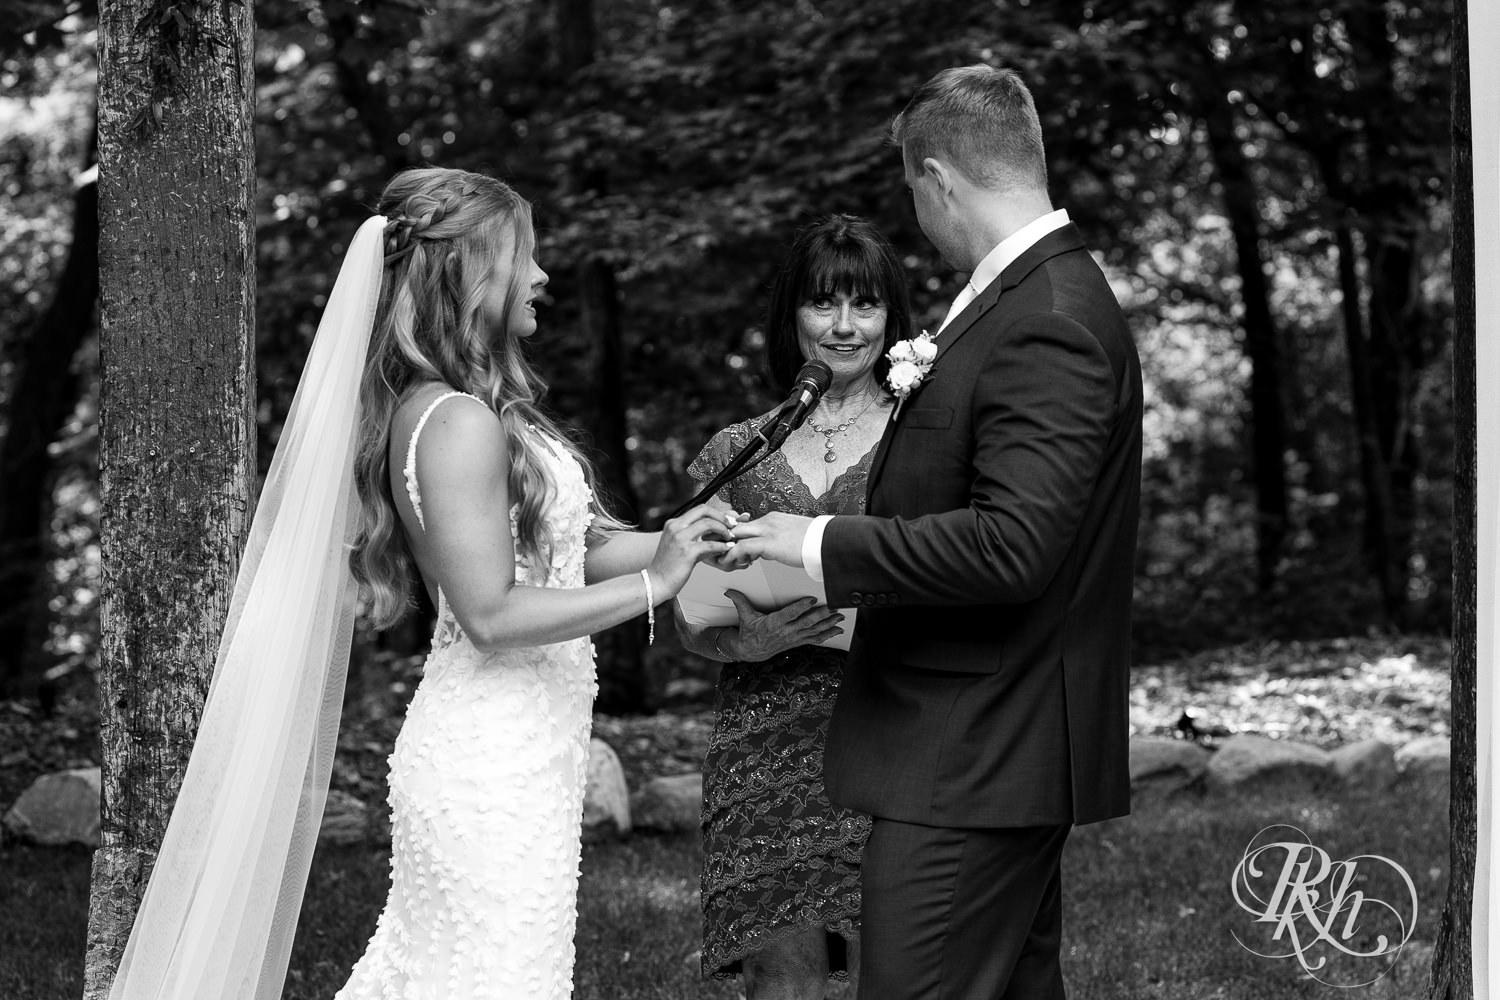 Bride and groom exchange rings during wedding ceremony on wedding day at Ahavah Cottage in Elysian, Minnesota.